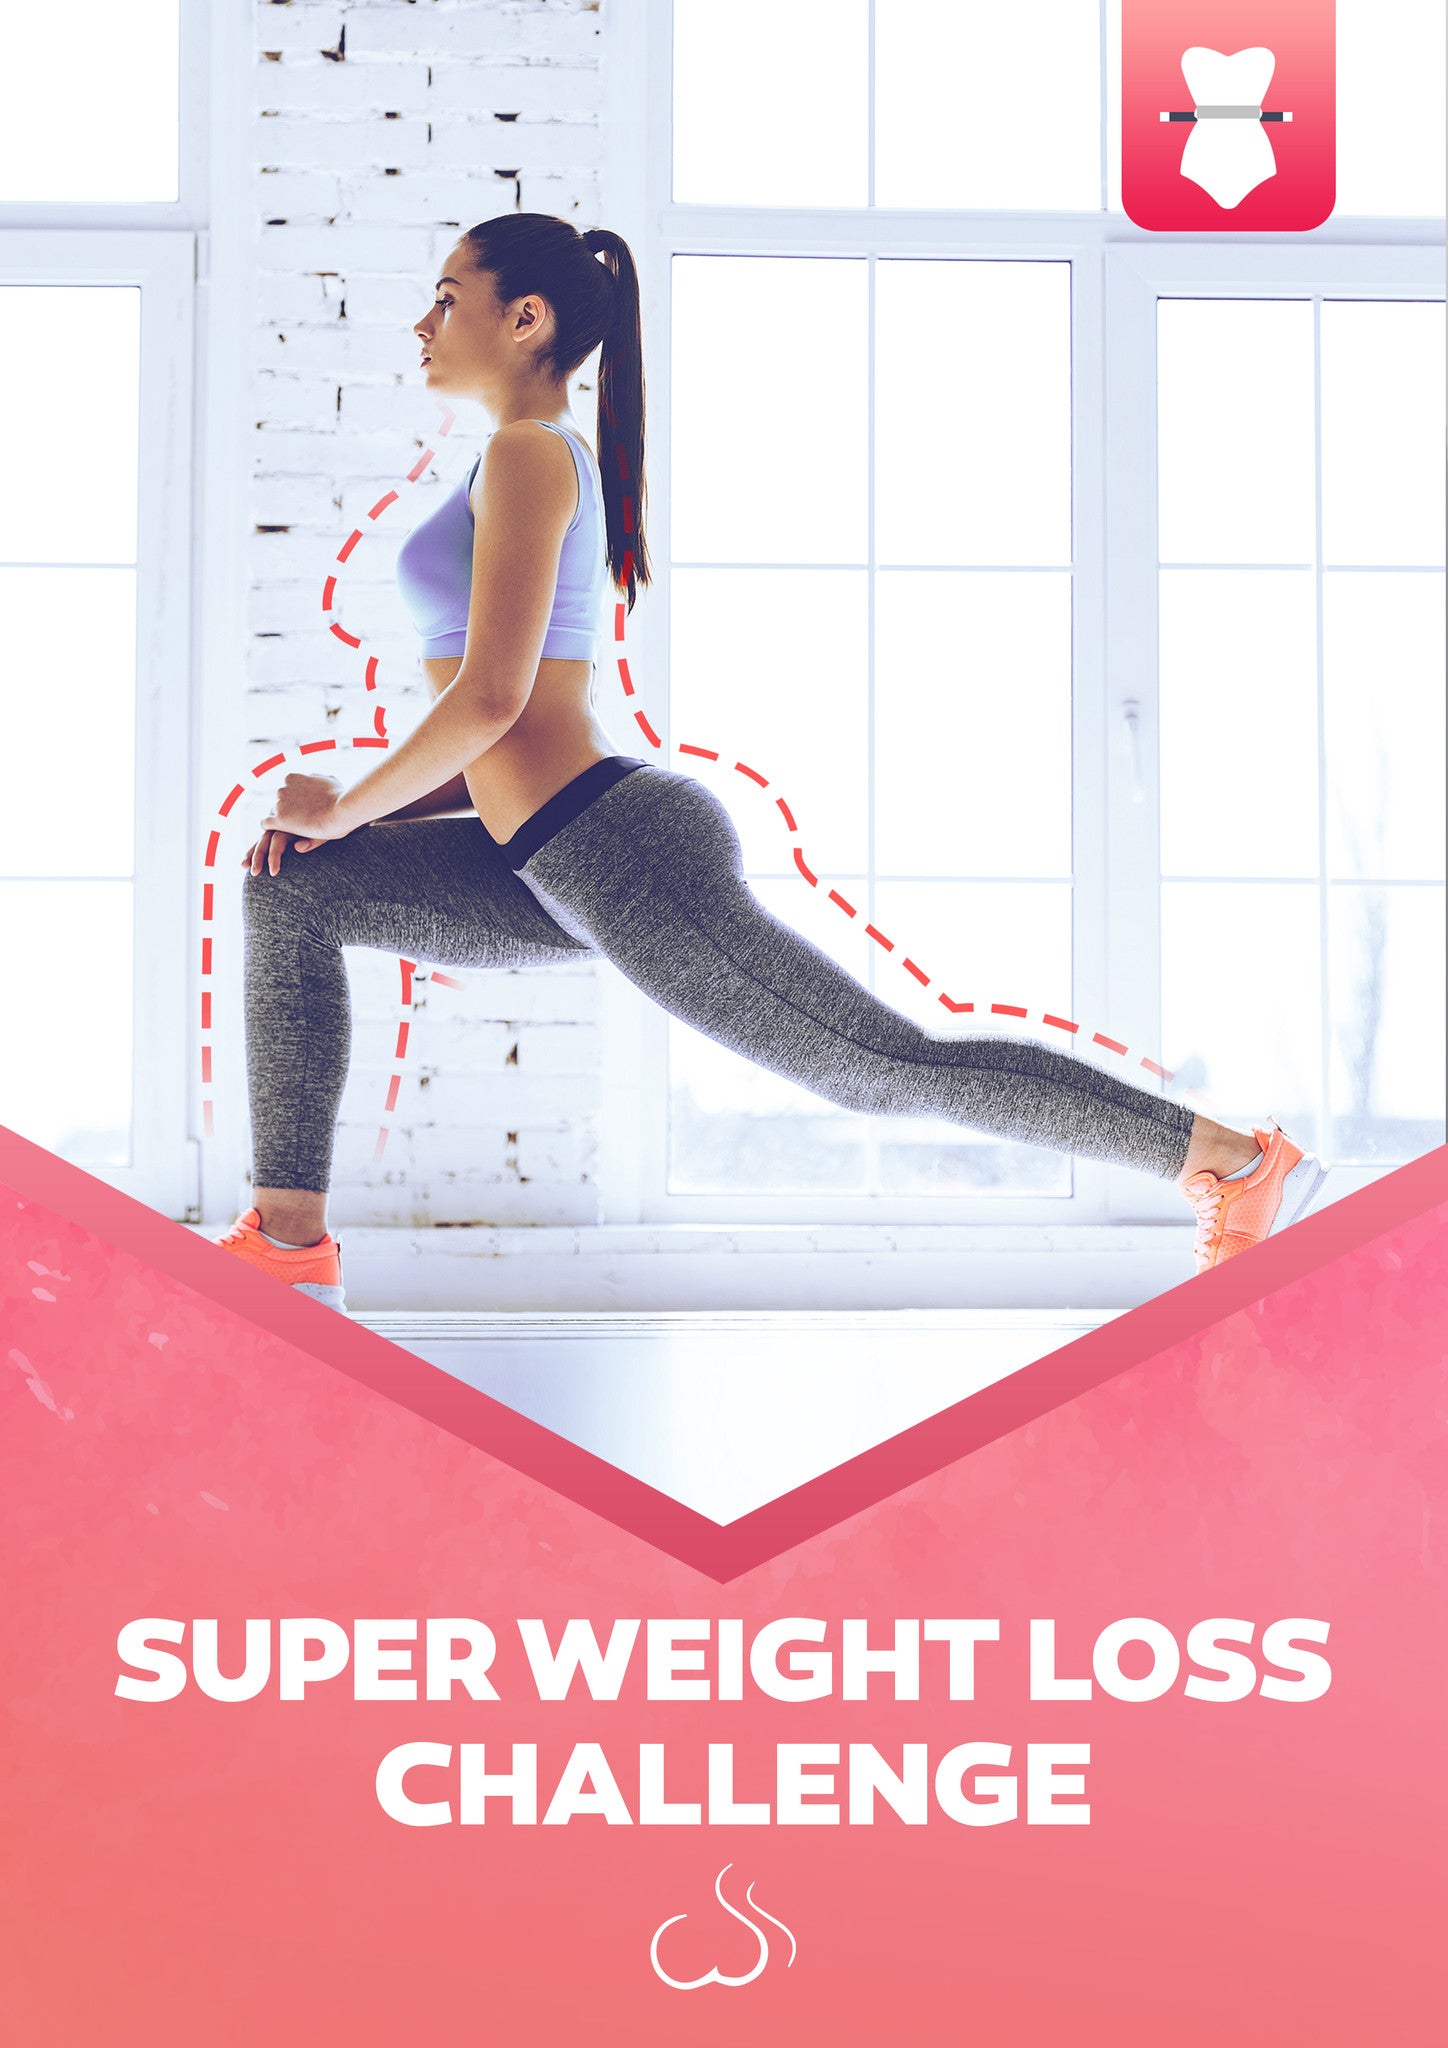 The Super Weight Loss Challenge